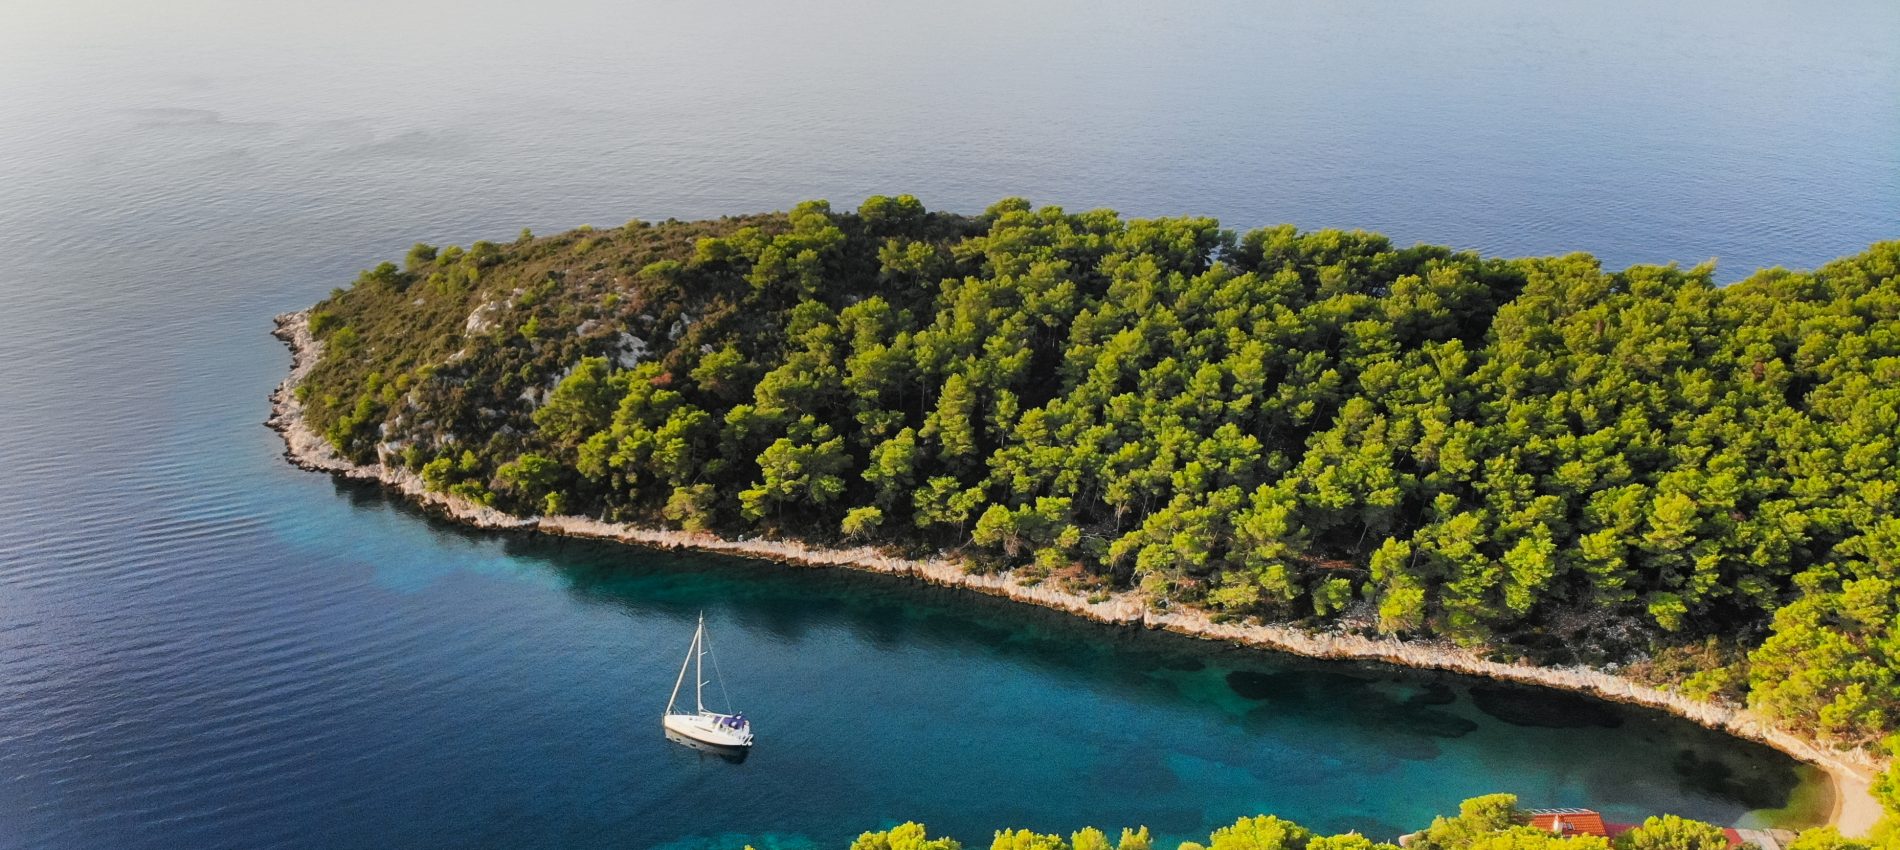 Yacht Charter In Croatia  The Most Frequently Asked Questions (2020 update)